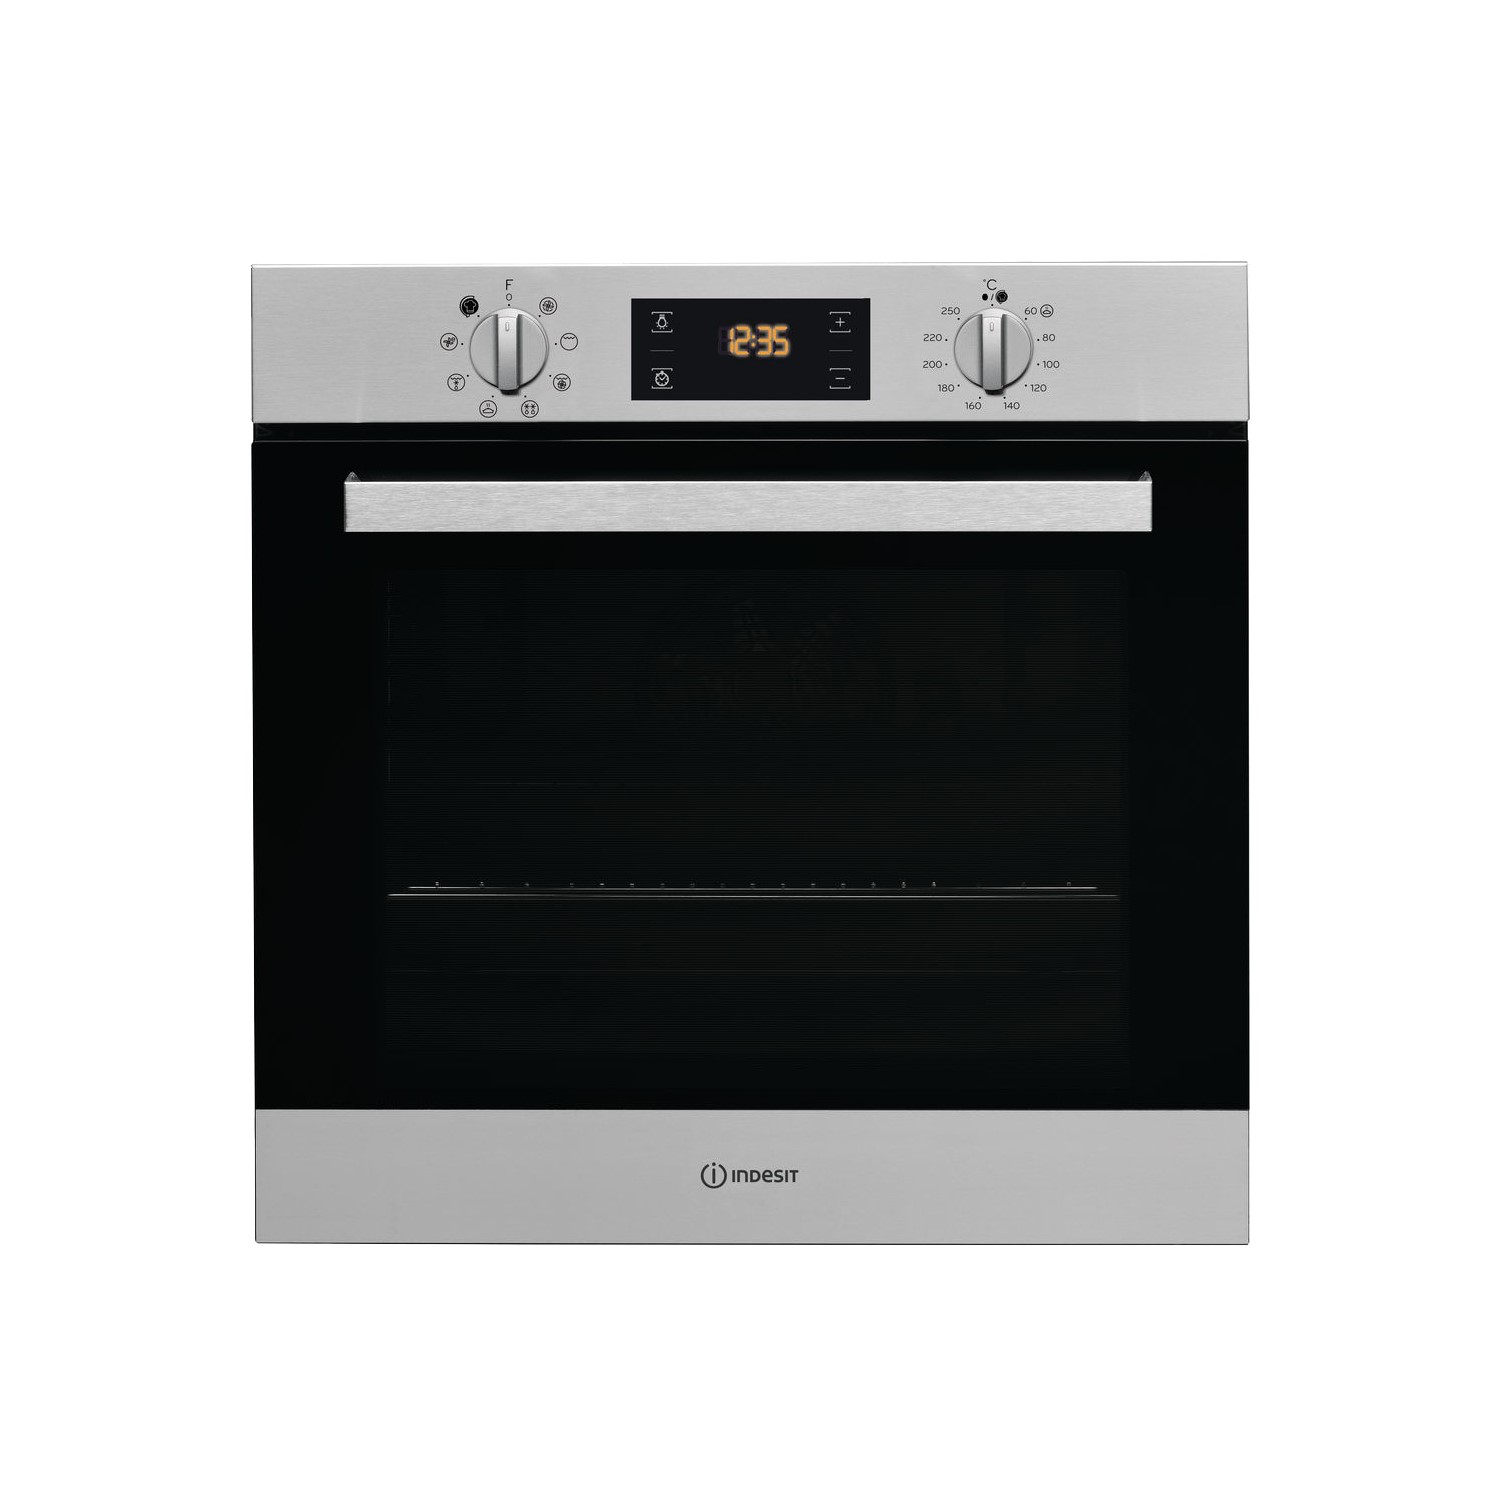 Indesit Aria IFW6340IX Built In Electric Single Oven - Stainless Steel - A Rated